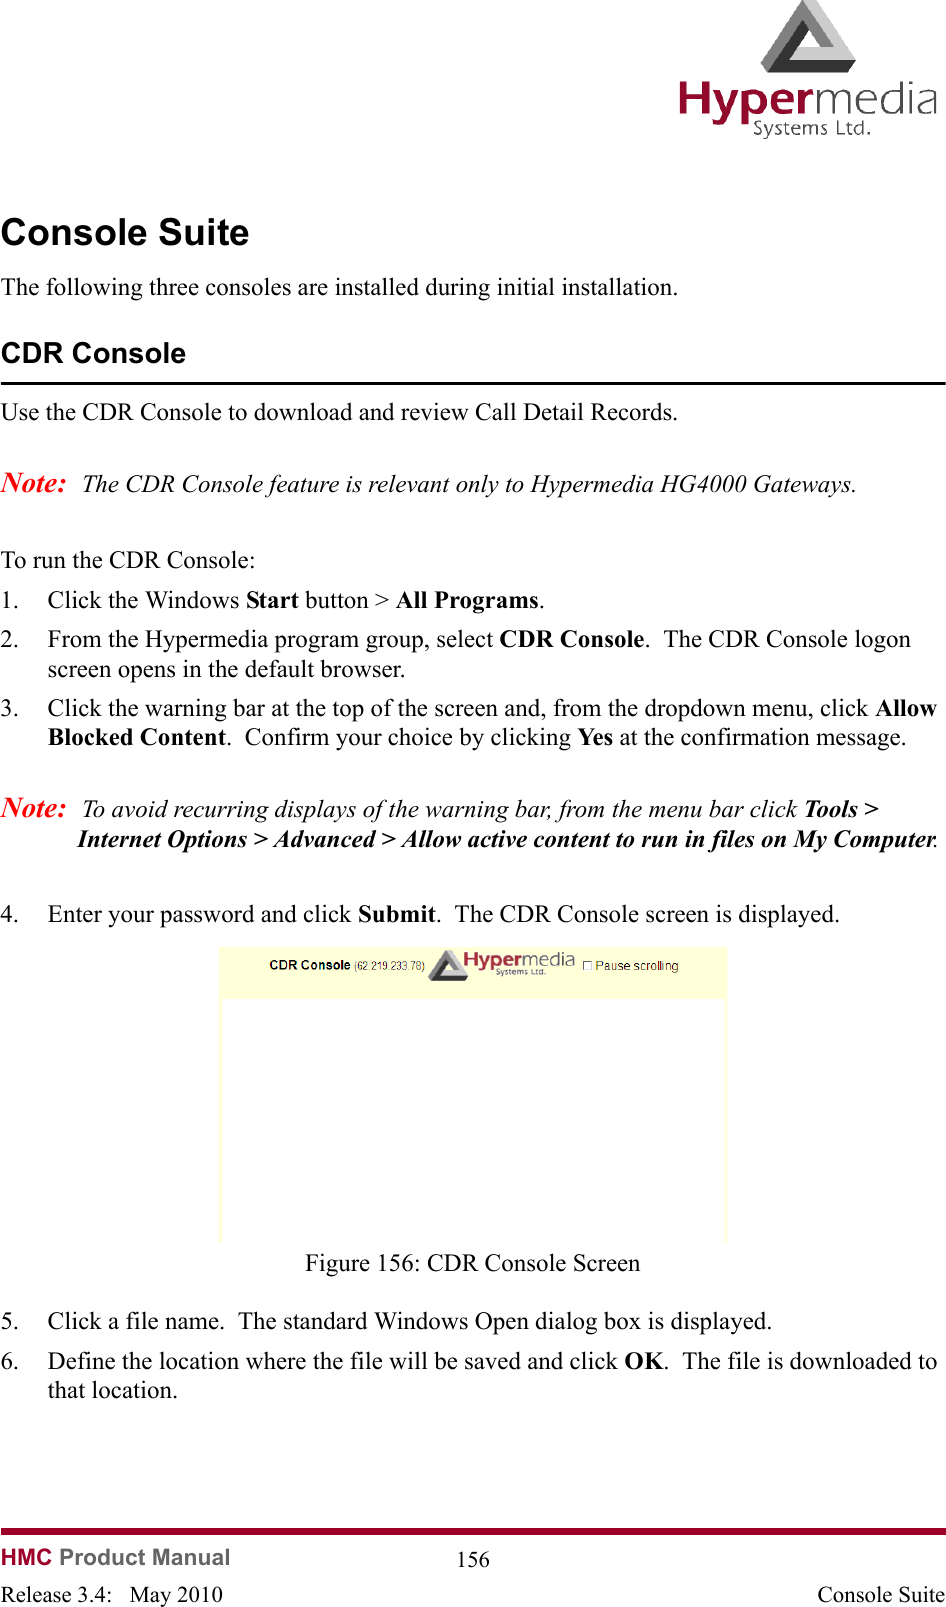   HMC Product Manual  156Release 3.4:   May 2010 Console SuiteConsole SuiteThe following three consoles are installed during initial installation.CDR ConsoleUse the CDR Console to download and review Call Detail Records.Note:  The CDR Console feature is relevant only to Hypermedia HG4000 Gateways.  To run the CDR Console:1. Click the Windows Start button &gt; All Programs.2. From the Hypermedia program group, select CDR Console.  The CDR Console logon screen opens in the default browser.3. Click the warning bar at the top of the screen and, from the dropdown menu, click Allow Blocked Content.  Confirm your choice by clicking Ye s  at the confirmation message.Note:  To avoid recurring displays of the warning bar, from the menu bar click Tools &gt; Internet Options &gt; Advanced &gt; Allow active content to run in files on My Computer. 4. Enter your password and click Submit.  The CDR Console screen is displayed.              Figure 156: CDR Console Screen5. Click a file name.  The standard Windows Open dialog box is displayed.6. Define the location where the file will be saved and click OK.  The file is downloaded to that location.